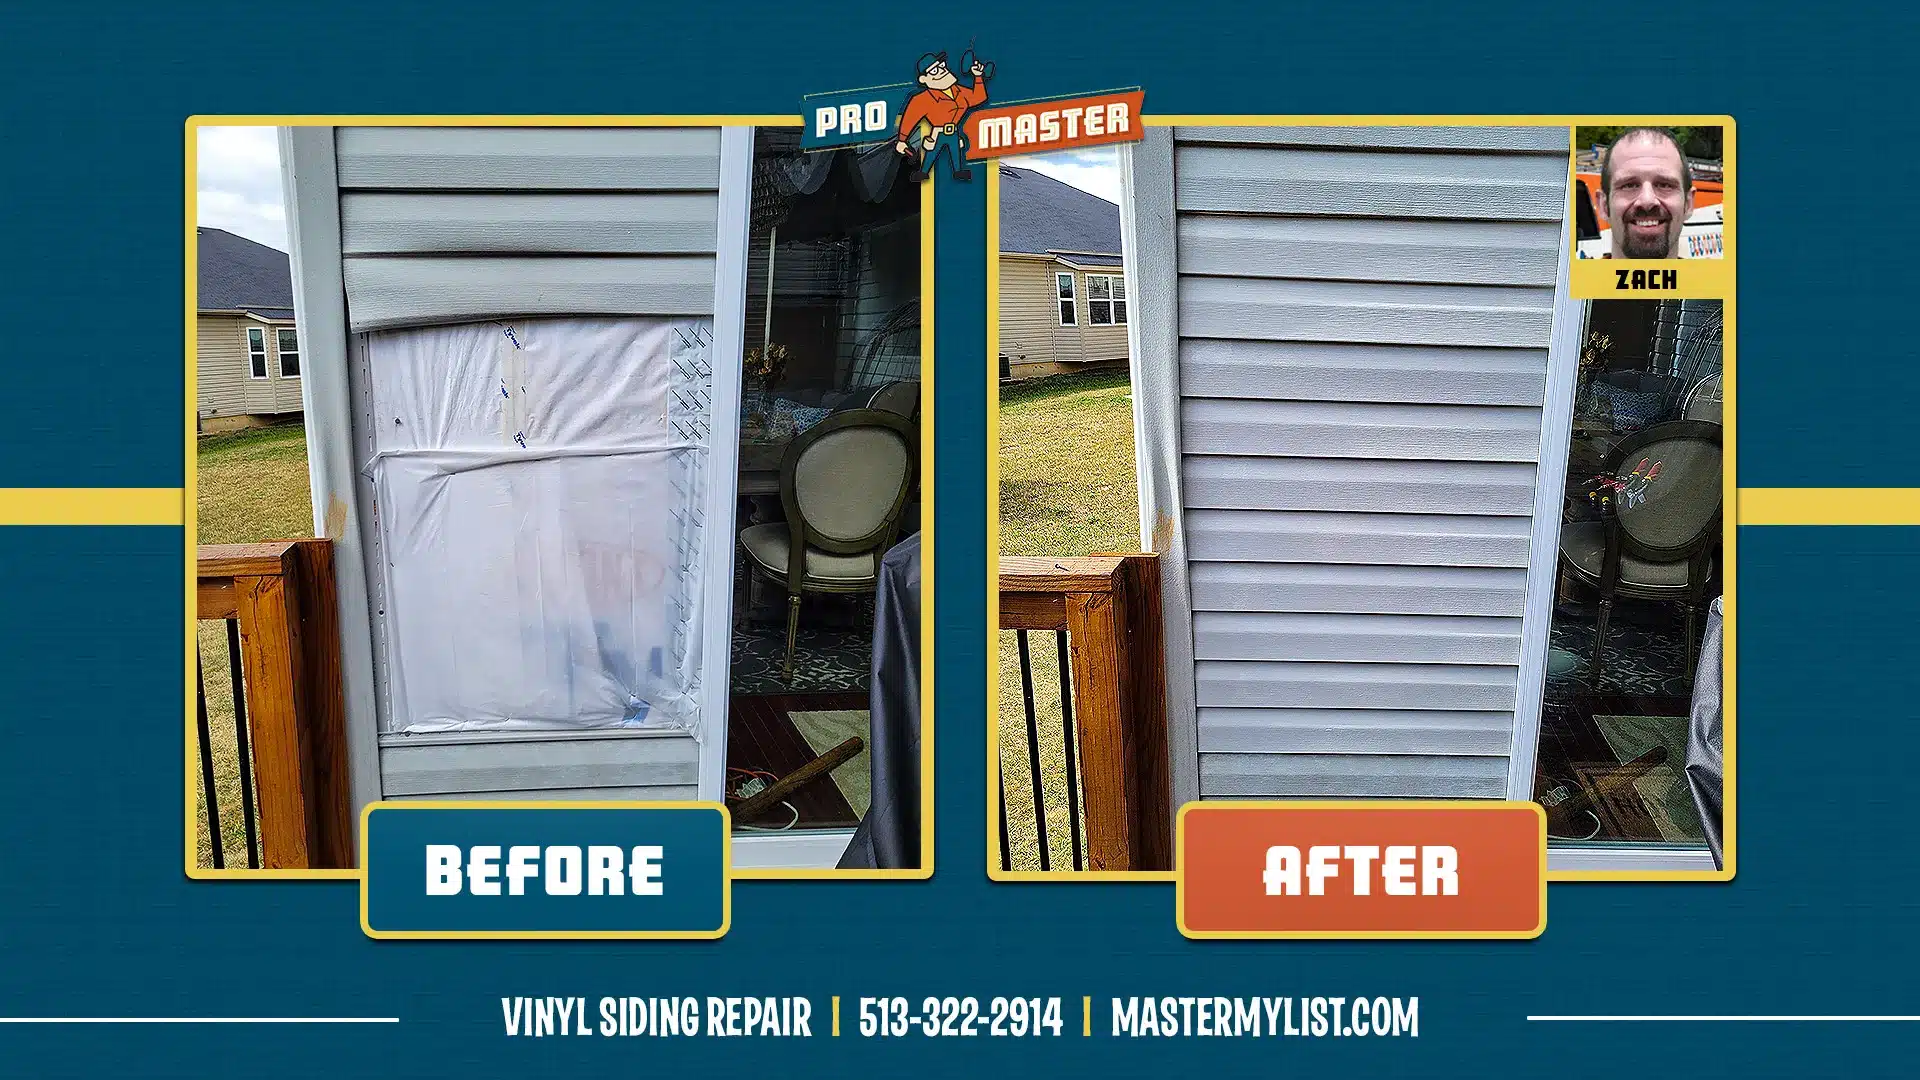 Before and after photos of vinyl siding repair and replacement completed by ProMaster craftsman.